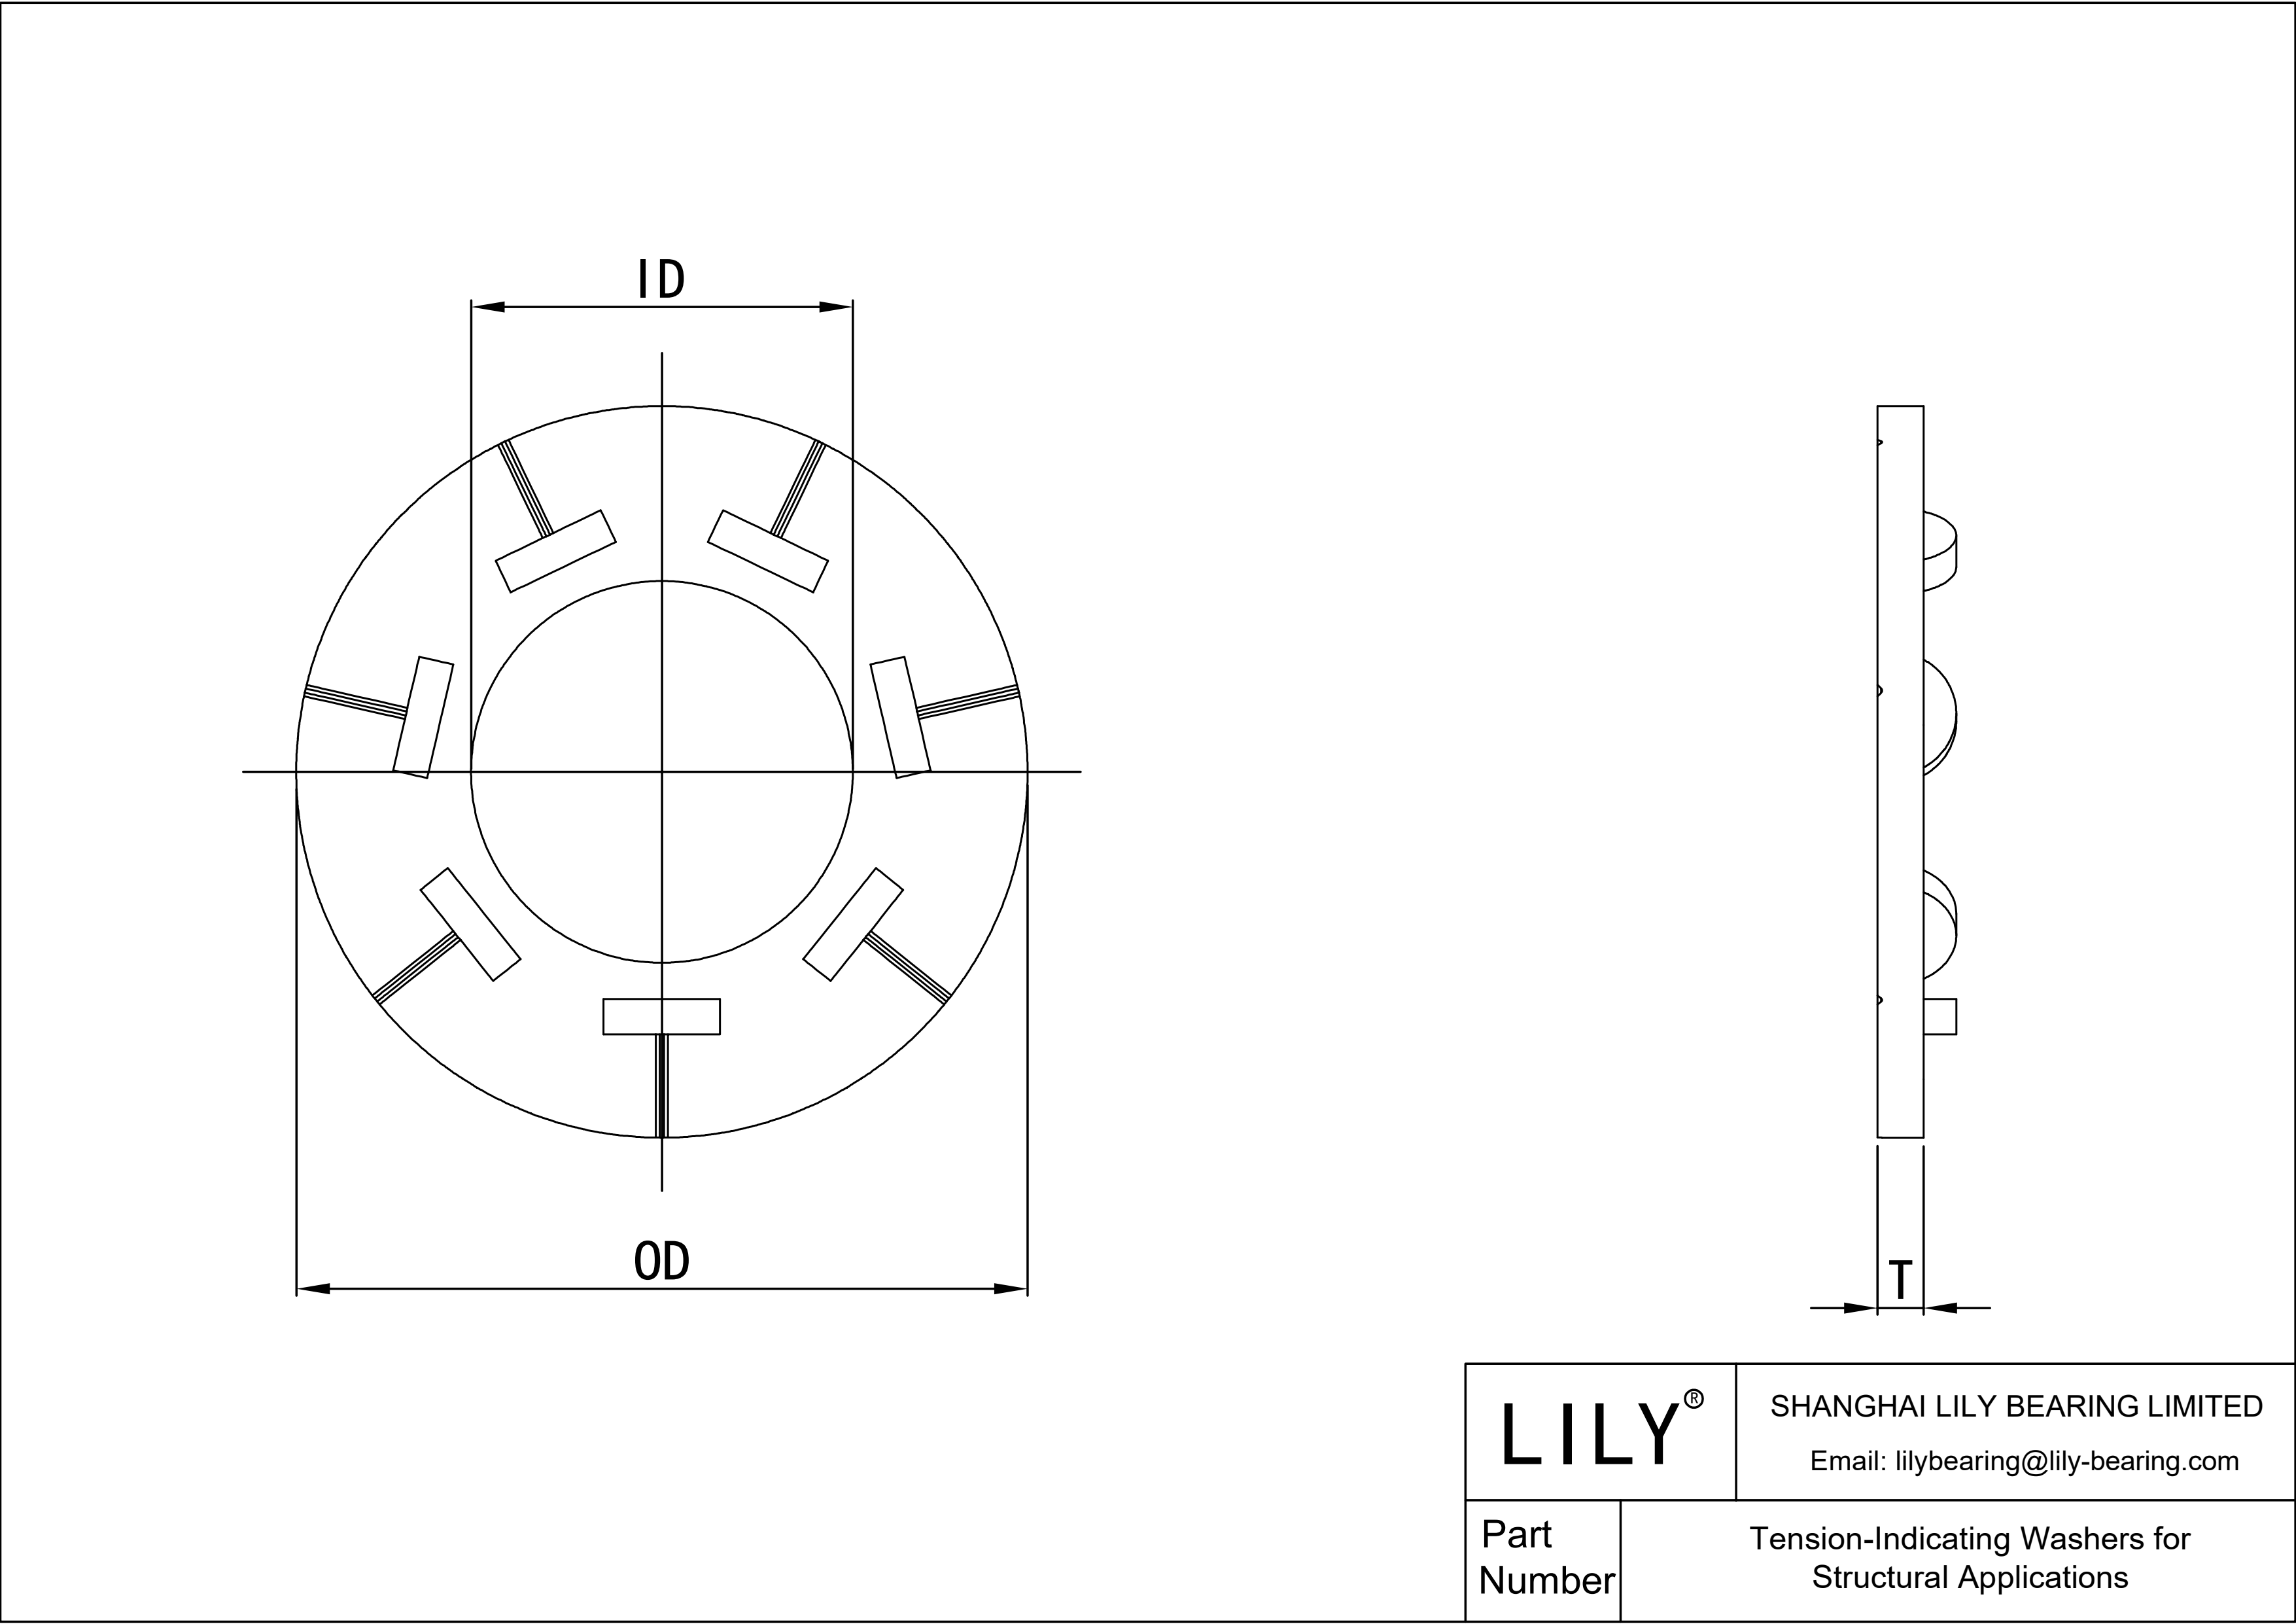 JFDBIABBE Tension-Indicating Washers for Structural Applications cad drawing